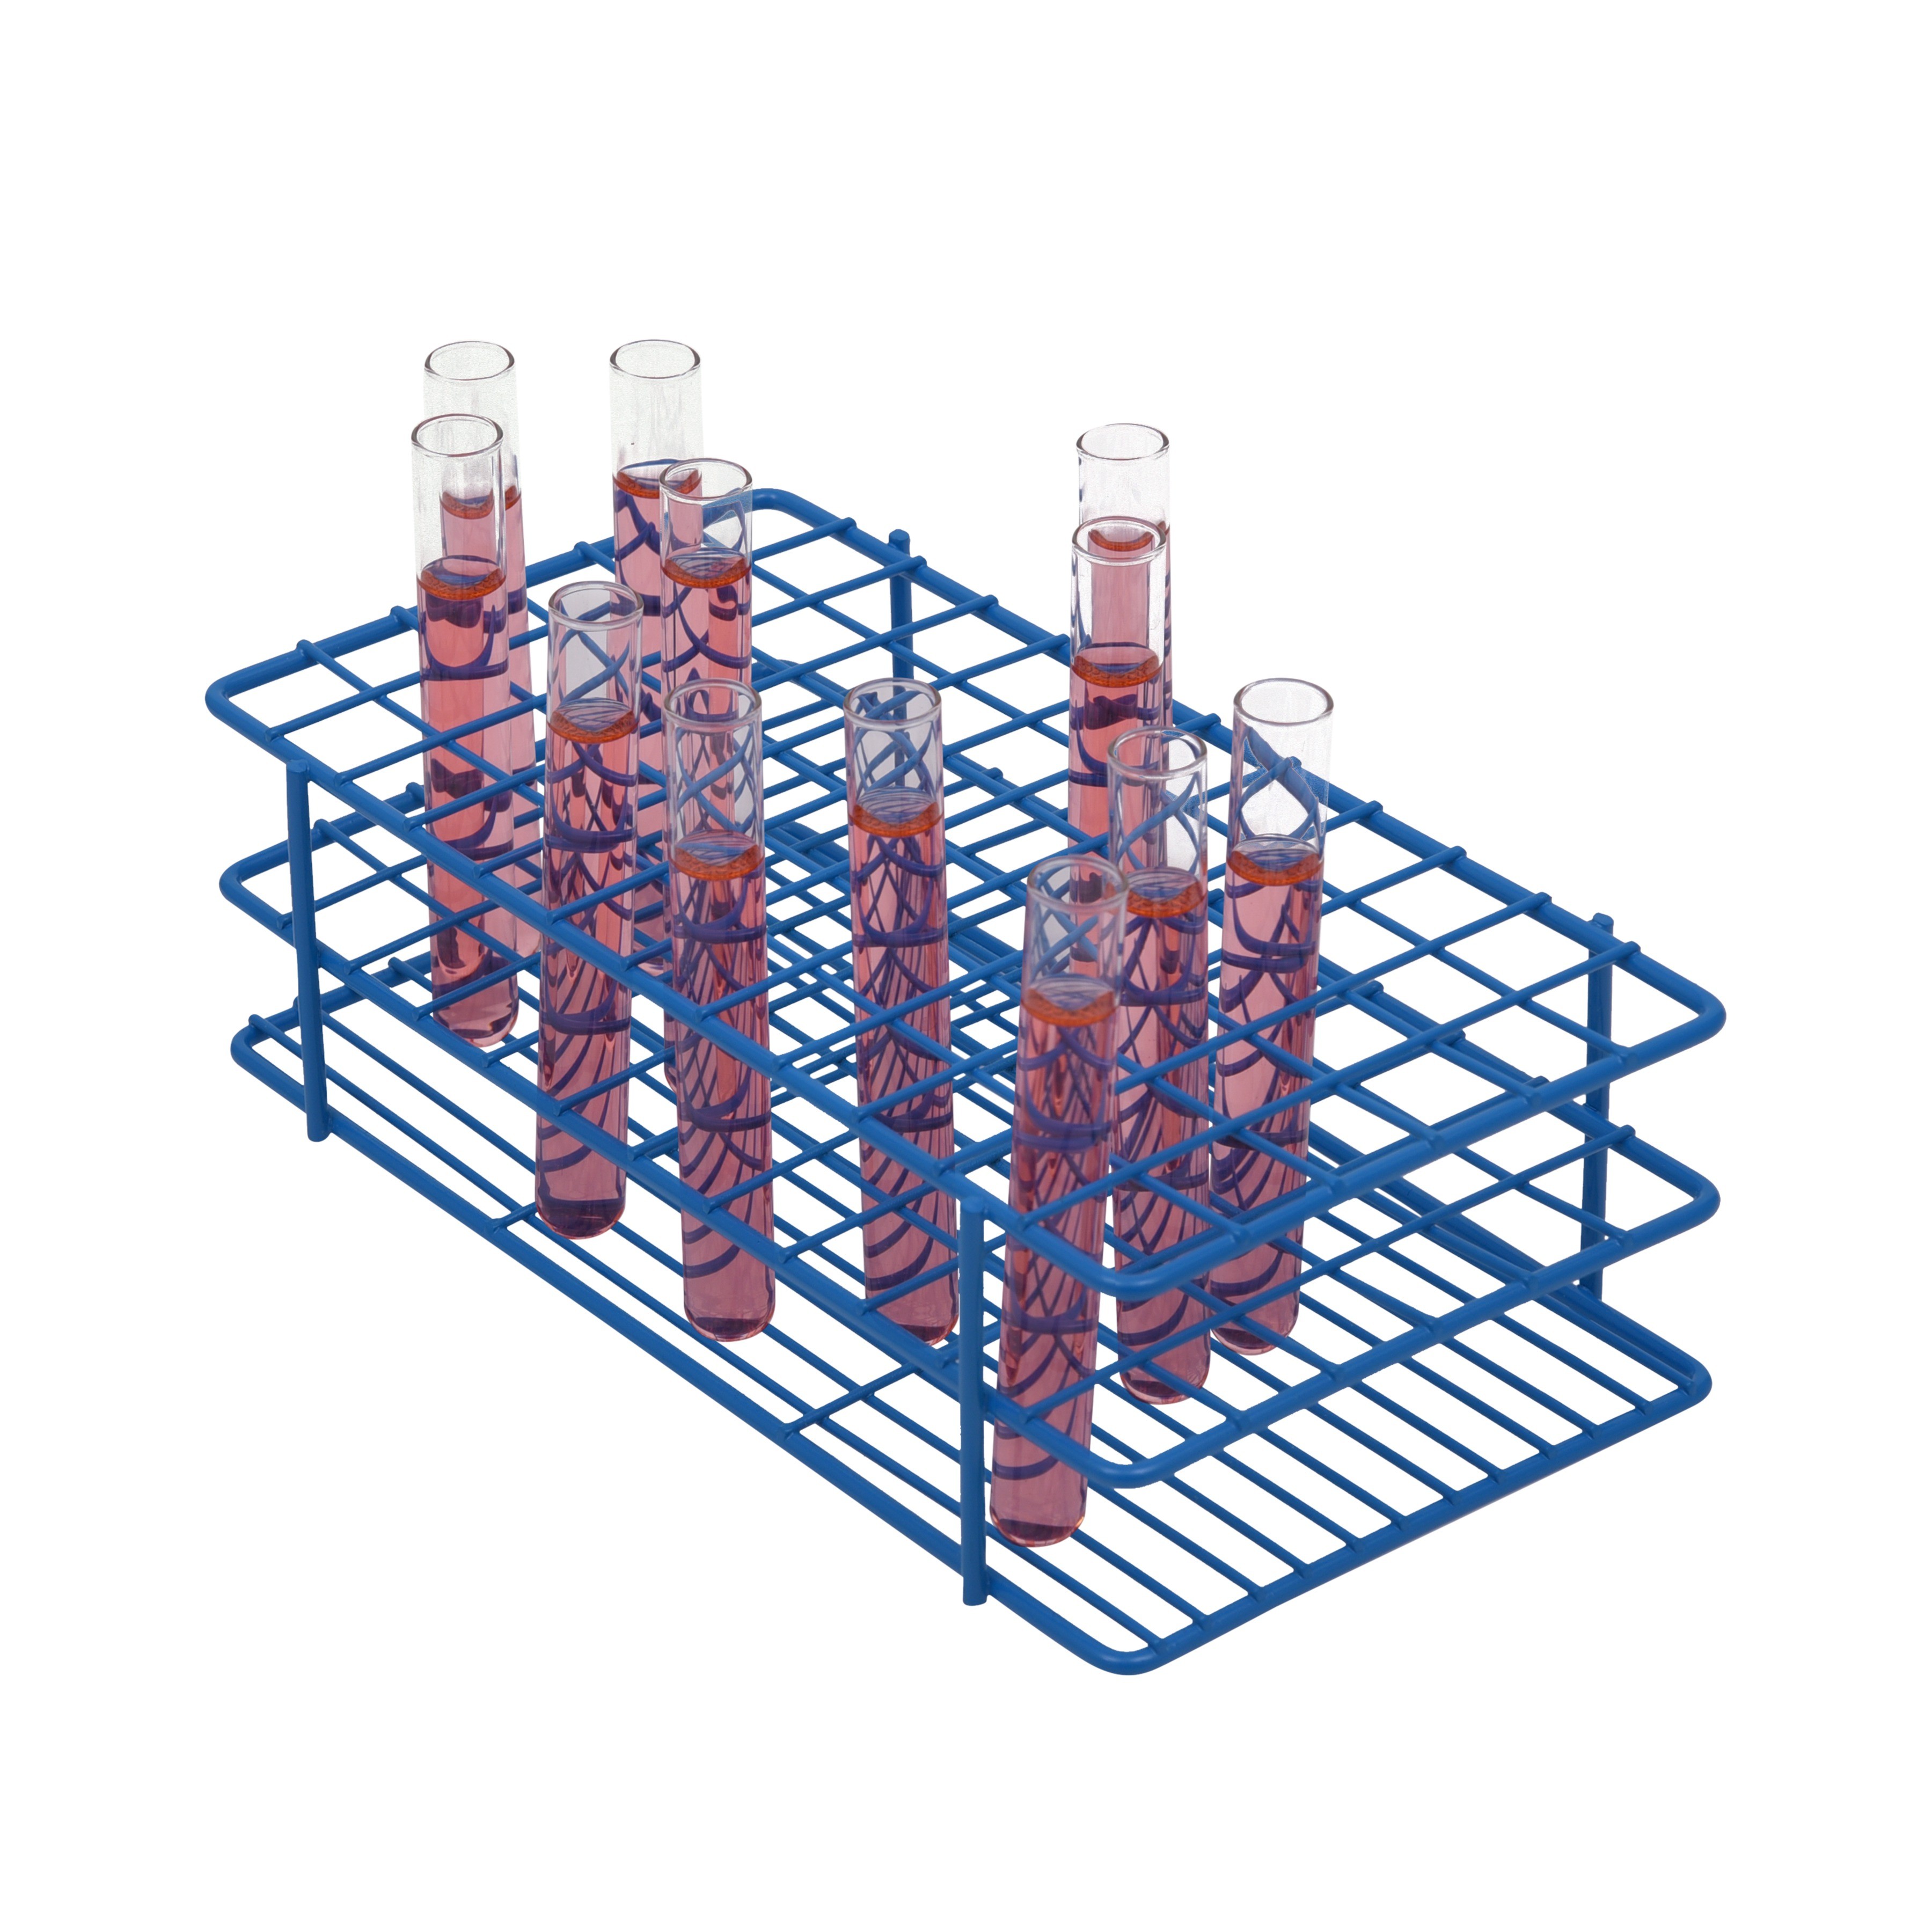 9⁹/₁₆ x 8 x 3¹/₄ in. 80 Places Blue Bel-Art F18764-0001 Poxygrid Test Tube Rack; 16-20mm 